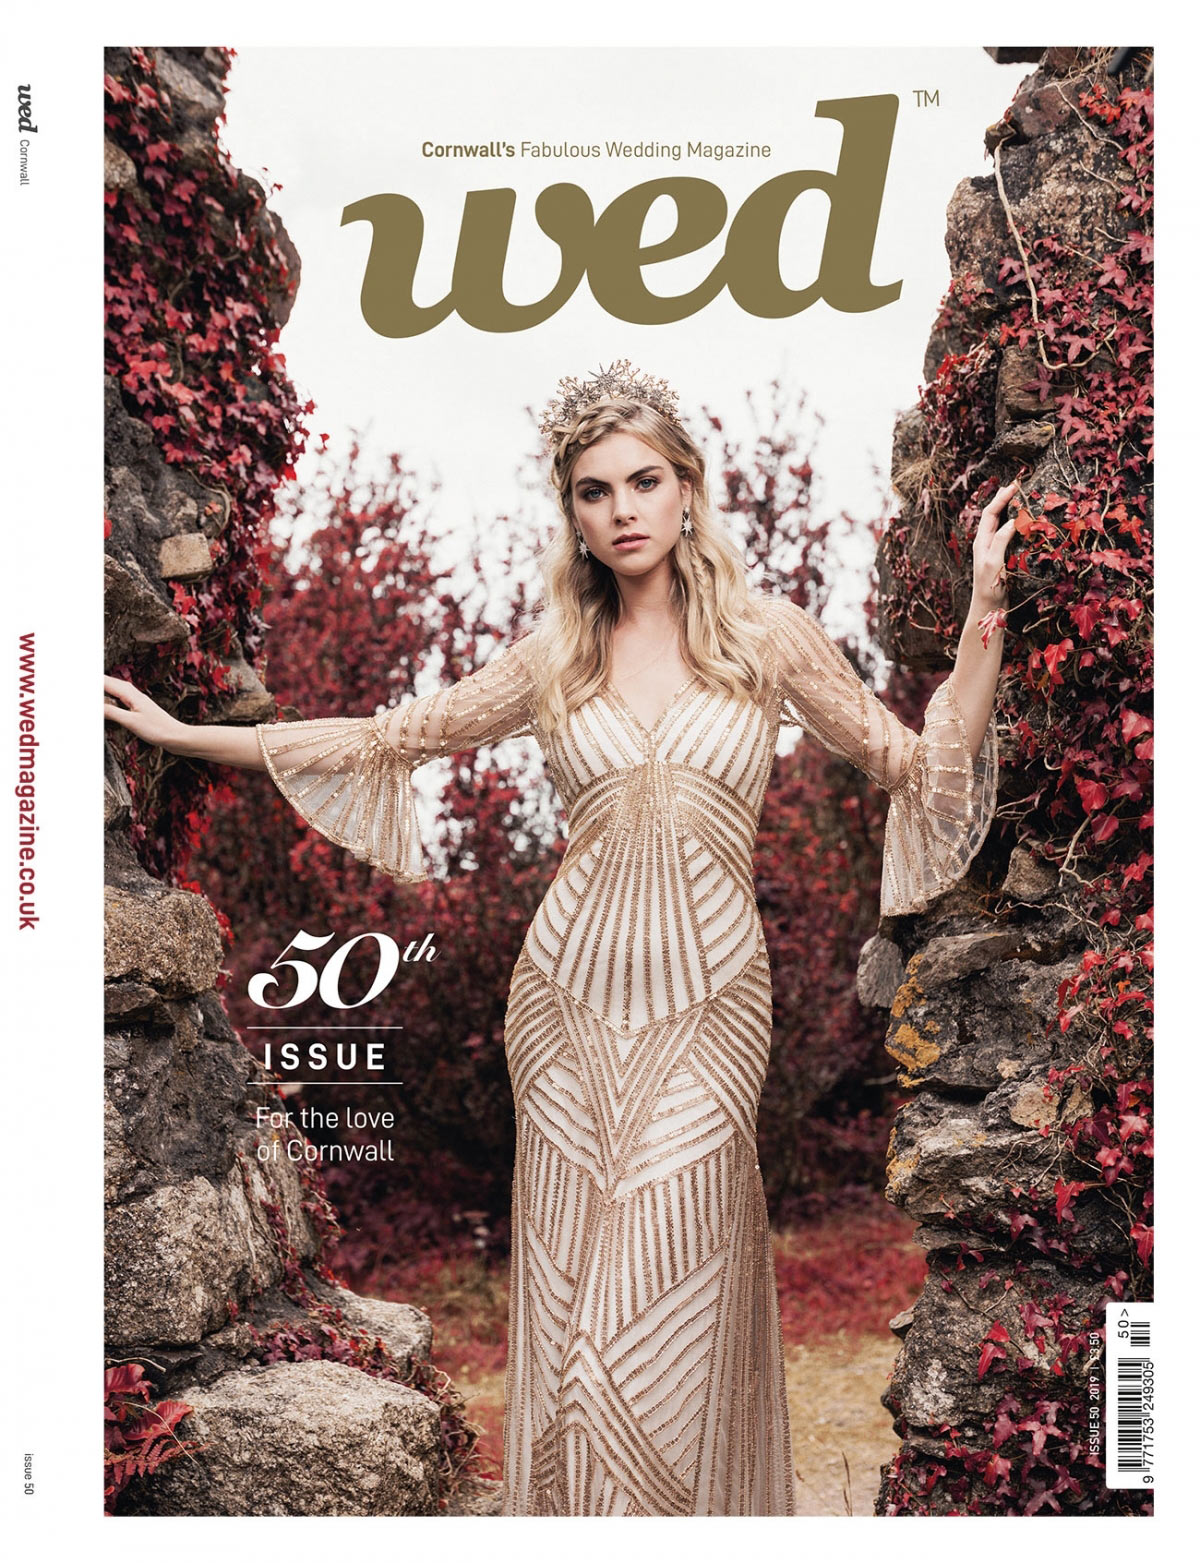 Introducing our 50th Cornwall issue of Wed!